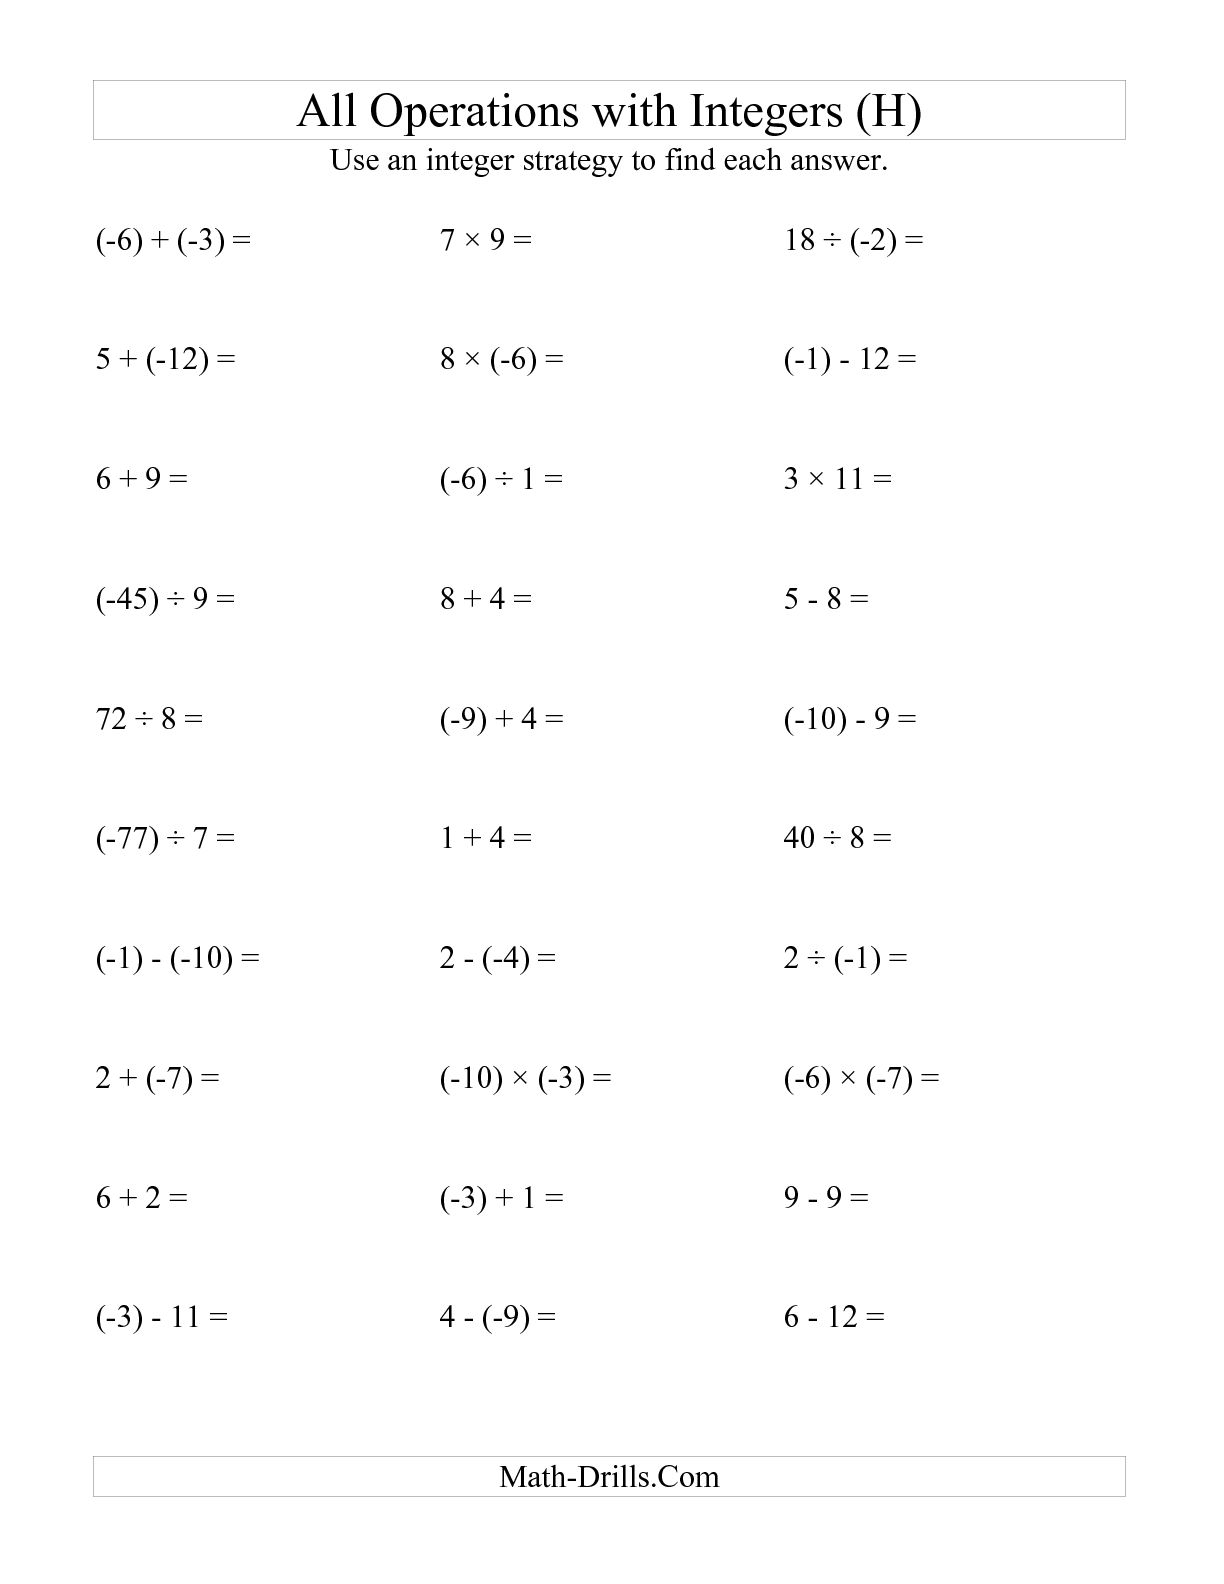 multiplying-dividing-negative-numbers-by-vics25-teaching-resources